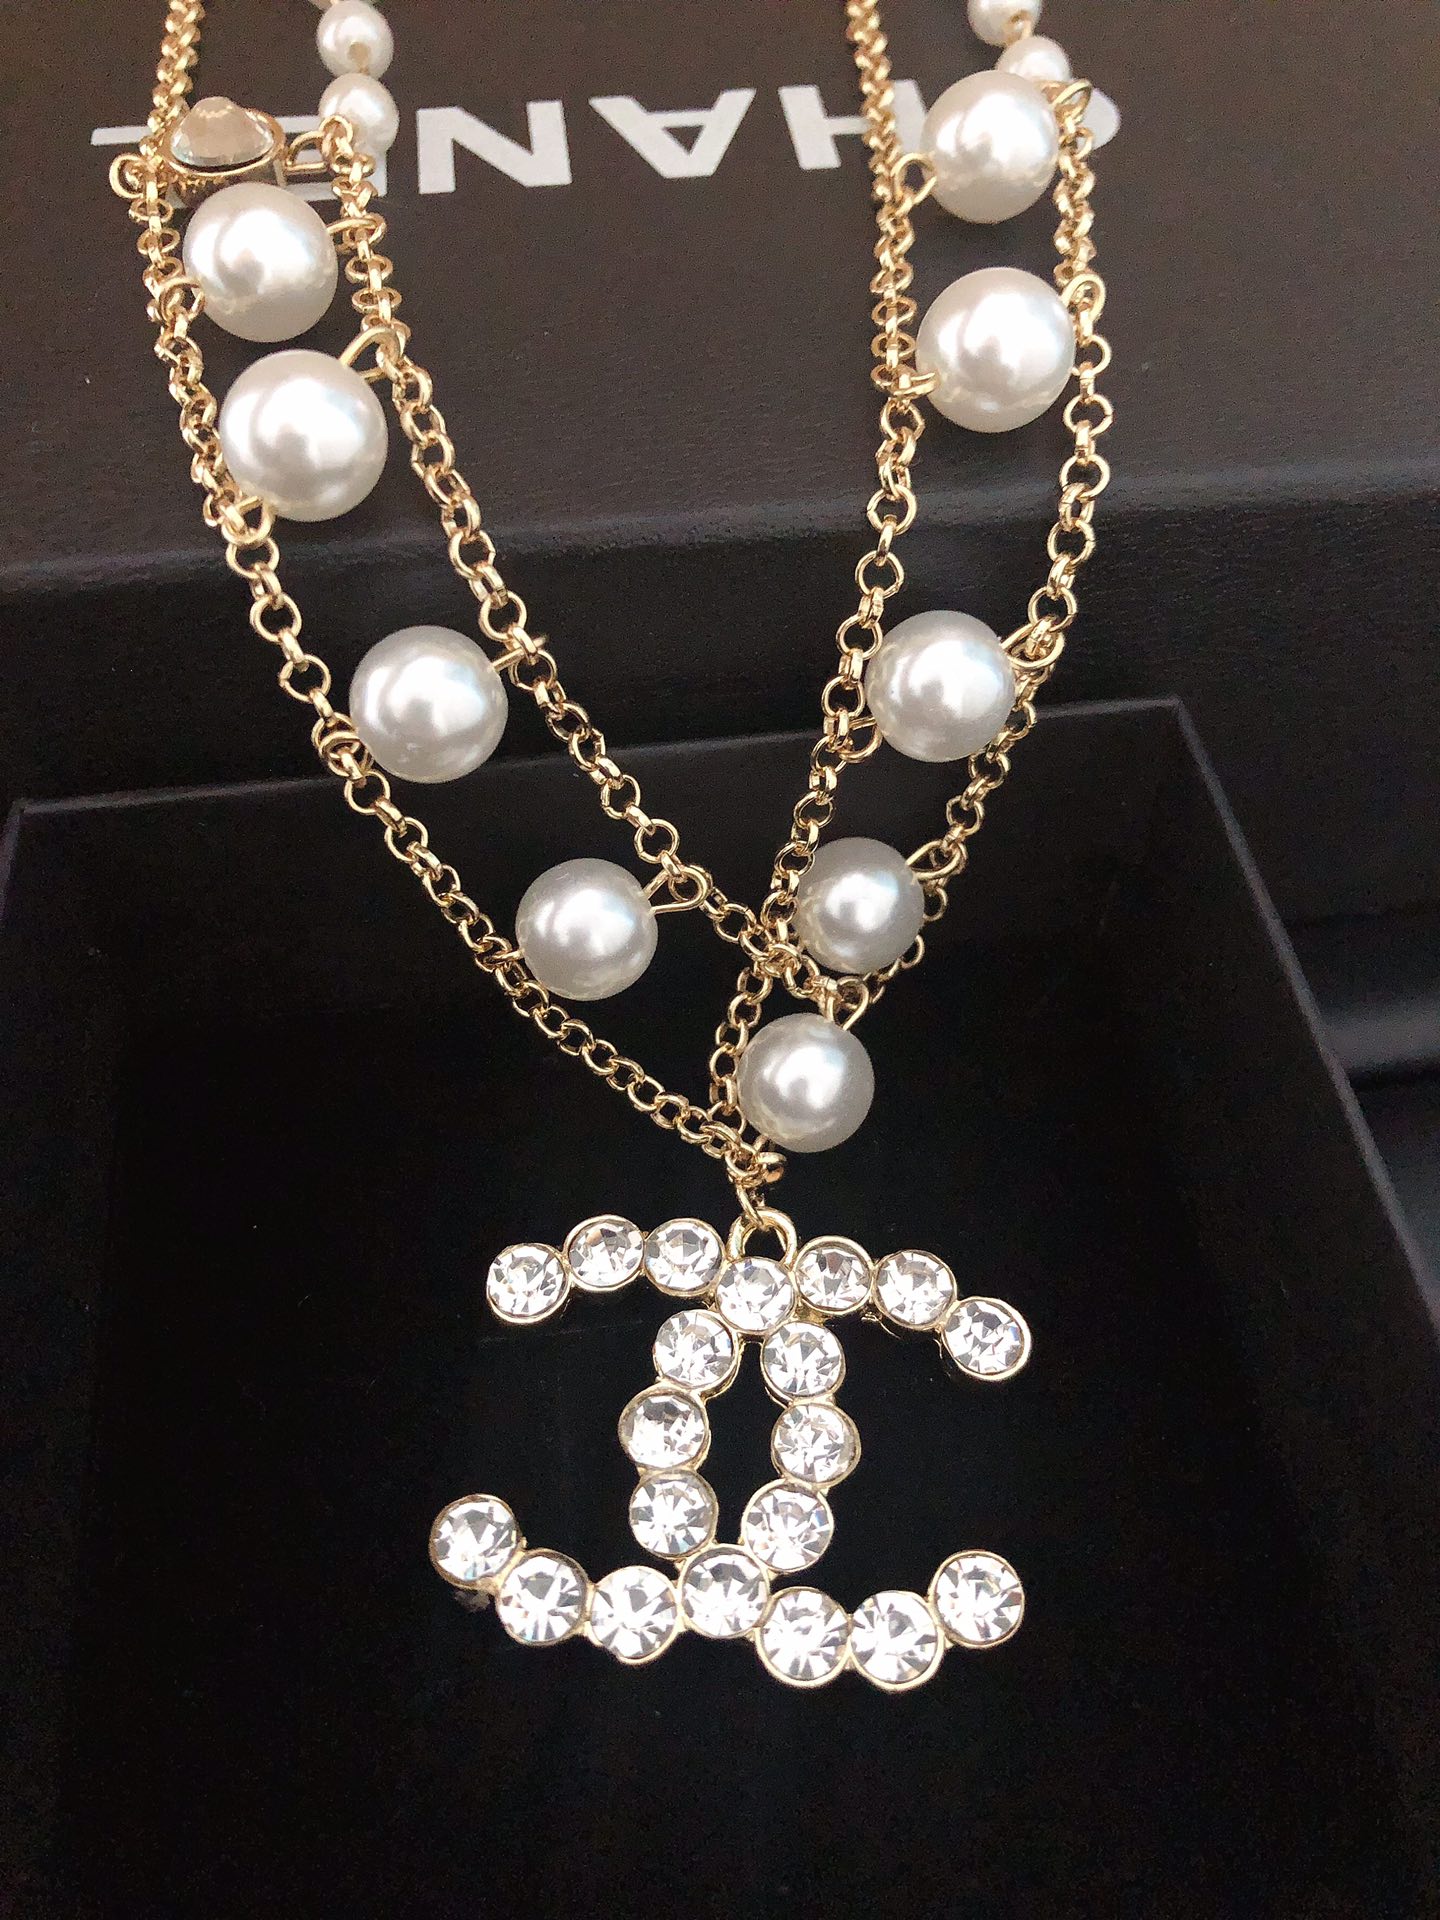 Chanel pearls necklace 113057